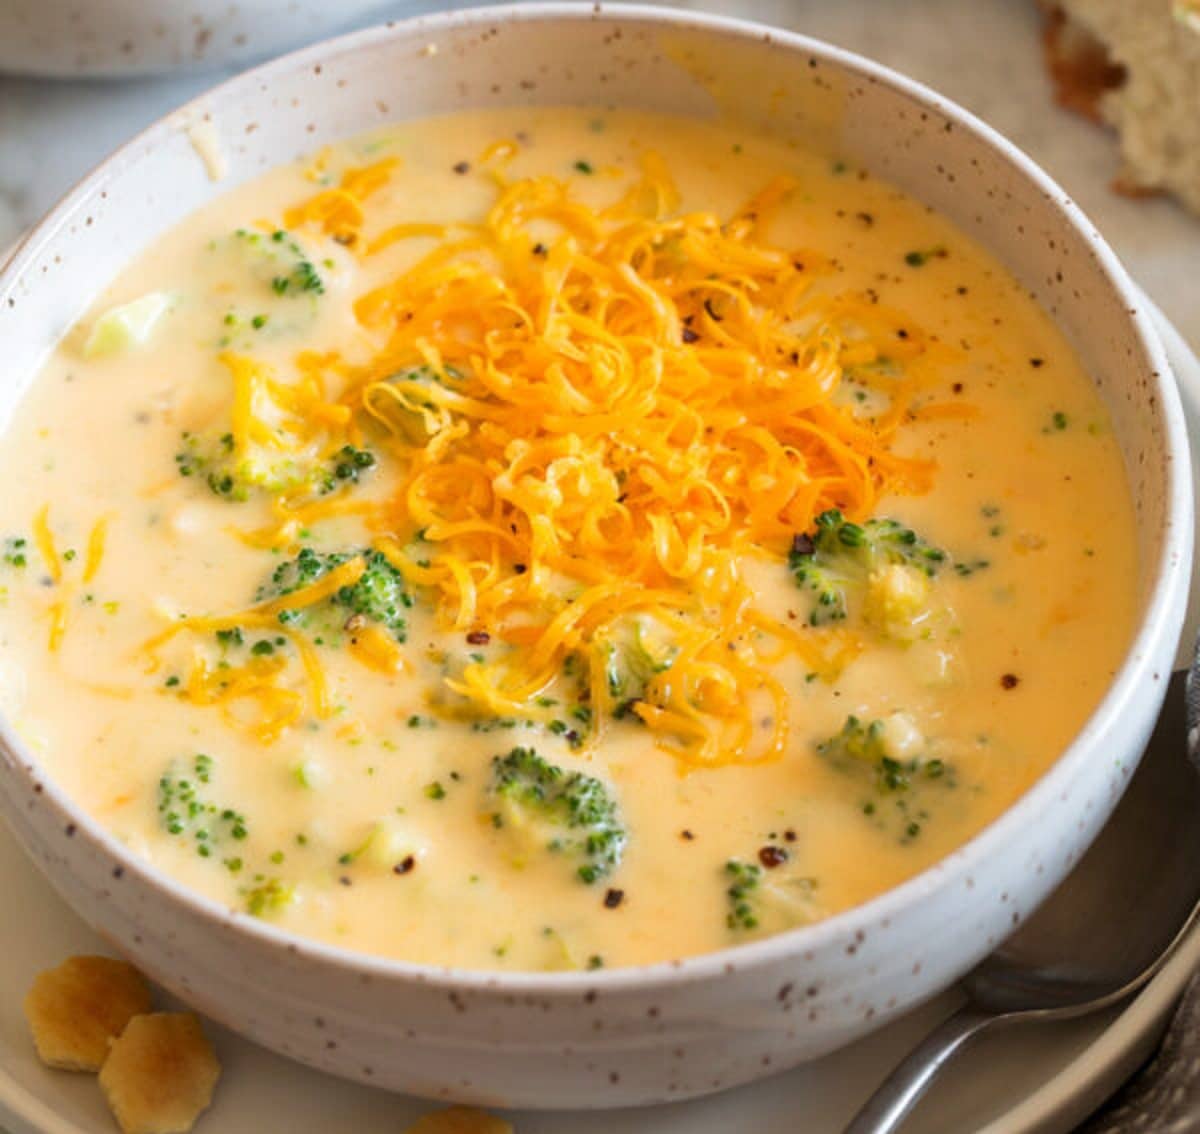 Cheese and Broccoli Soup topped with cheddar cheese in a bowl